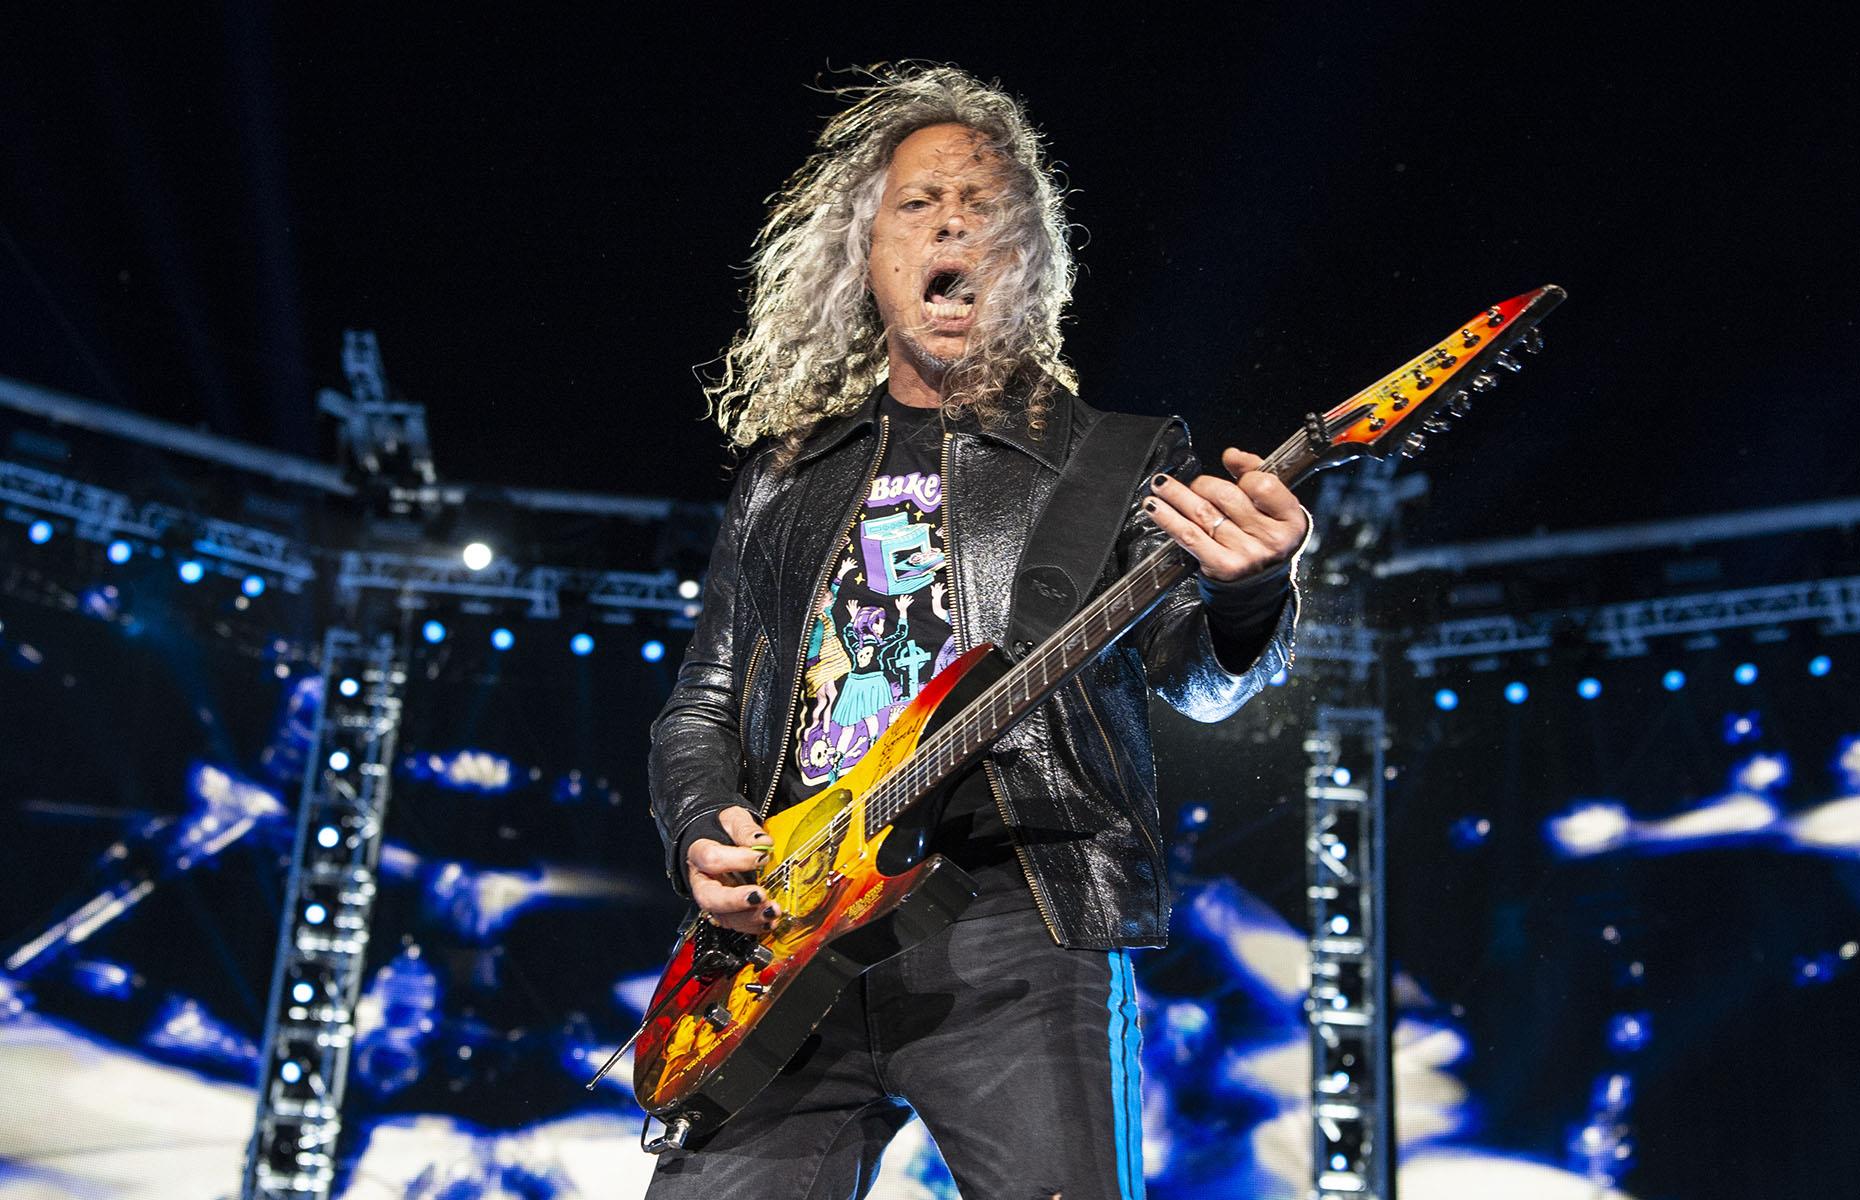 <p>Heavy metal titans Metallica embarked upon their electrifying <em>WorldWired Tour</em> in 2016, coinciding with the release of their tenth studio album, <em>Hardwired... to Self-Destruct.</em></p>  <p>Over a four-year period, Metallica played 143 shows spanning four continents. Over four million metalheads were treated to performances of songs from the band's latest album, as well as crowd-pleasing hits like <em>Master of Puppets</em> and <em>For Whom the Bell Tolls.</em></p>  <p>However, the Australian leg had to be canceled due to frontman James Hetfield's struggles with addiction, while the South American leg was postponed until 2022 due to the COVID-19 pandemic.</p>  <p>Despite these setbacks, the tour still grossed $433.8 million, the equivalent of $538 million in 2024 money. This makes it the highest-grossing tour in the band's decade-spanning career.</p>